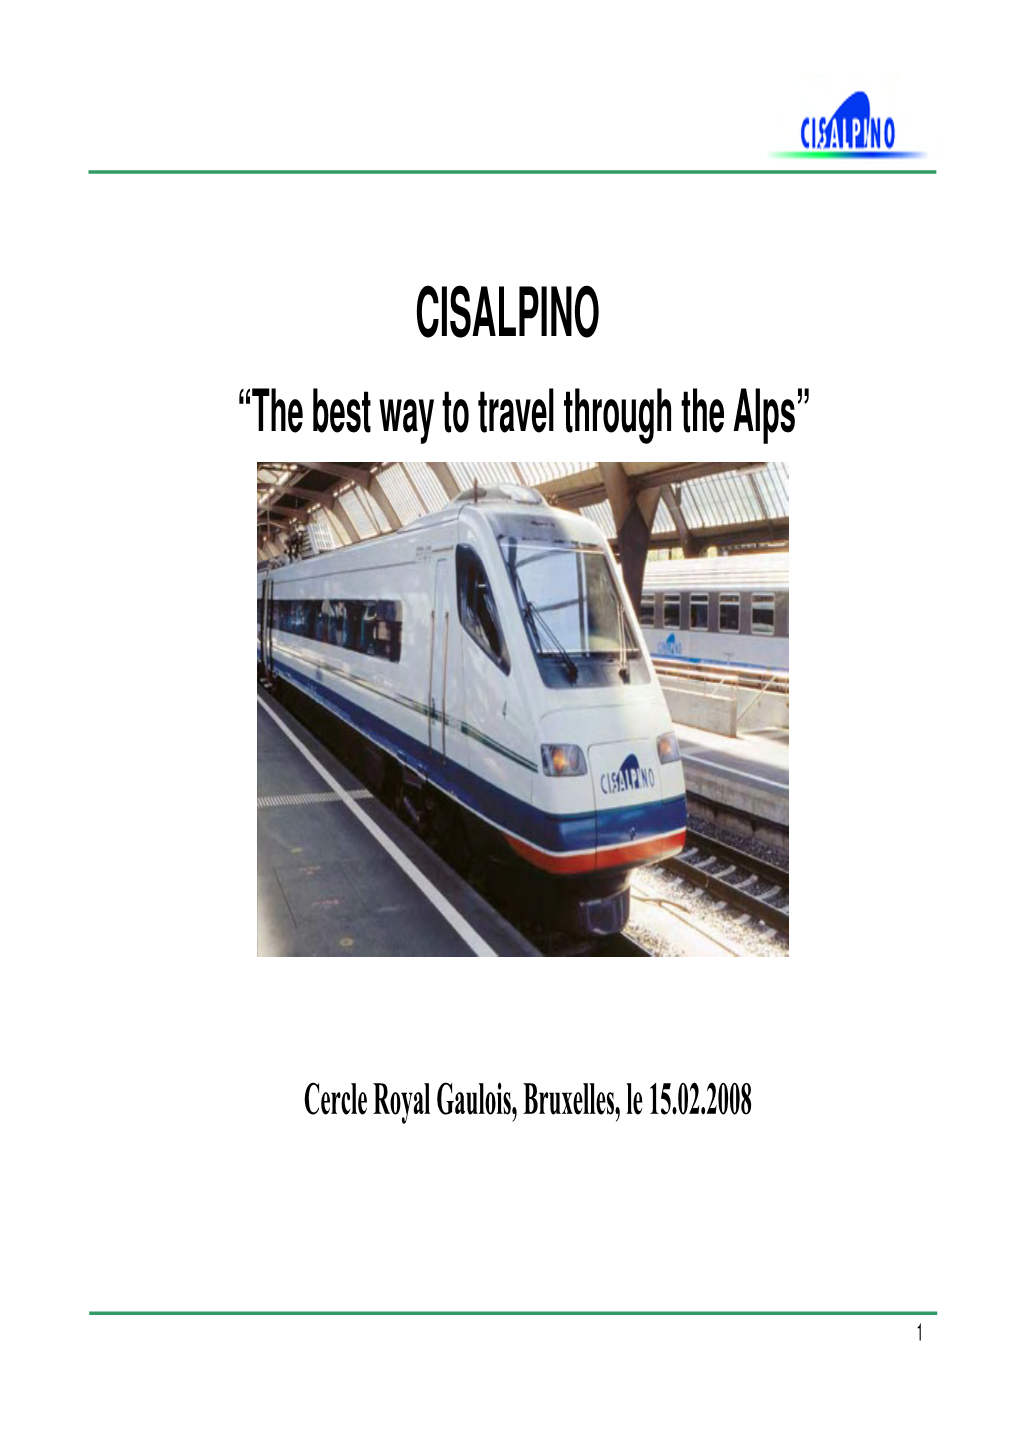 CISALPINO “The Best Way to Travel Through the Alps”